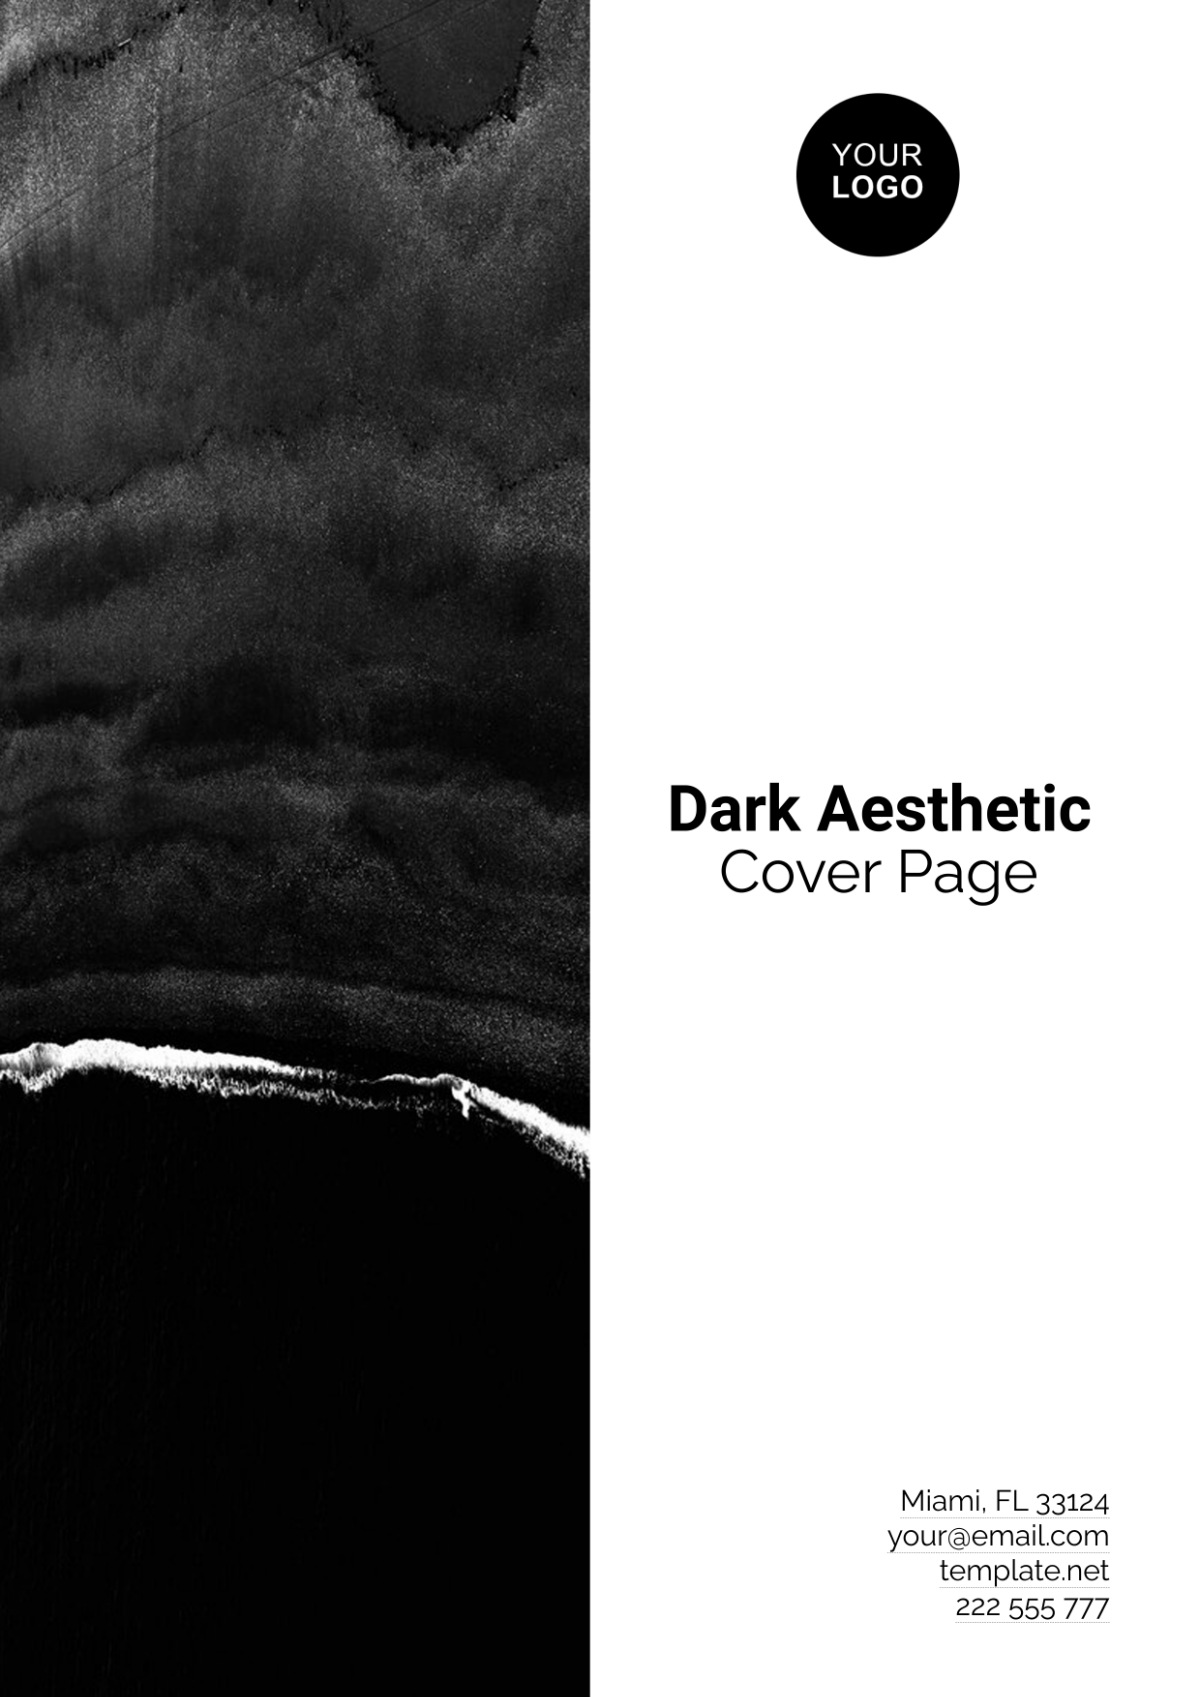 Dark Aesthetic Cover Page